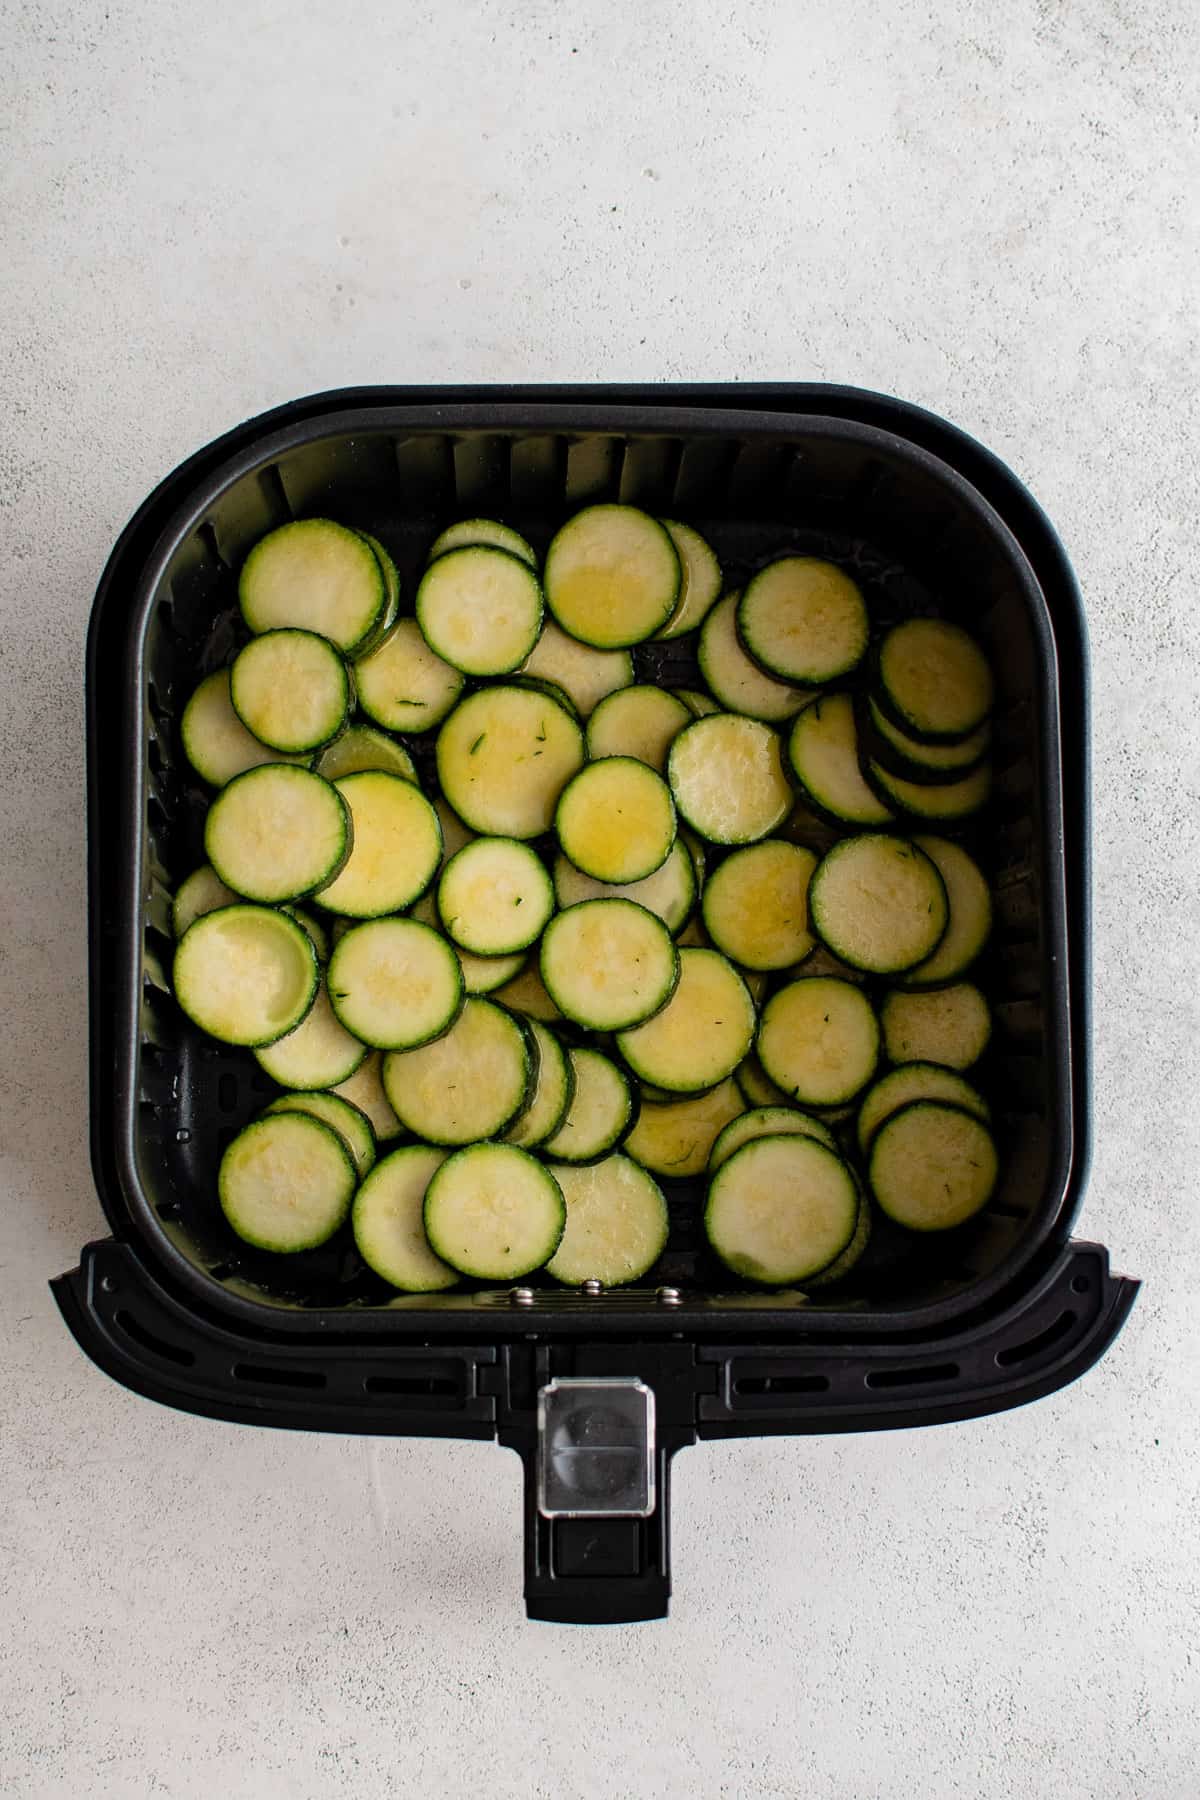 sliced and cooked zucchini in the air fryer.